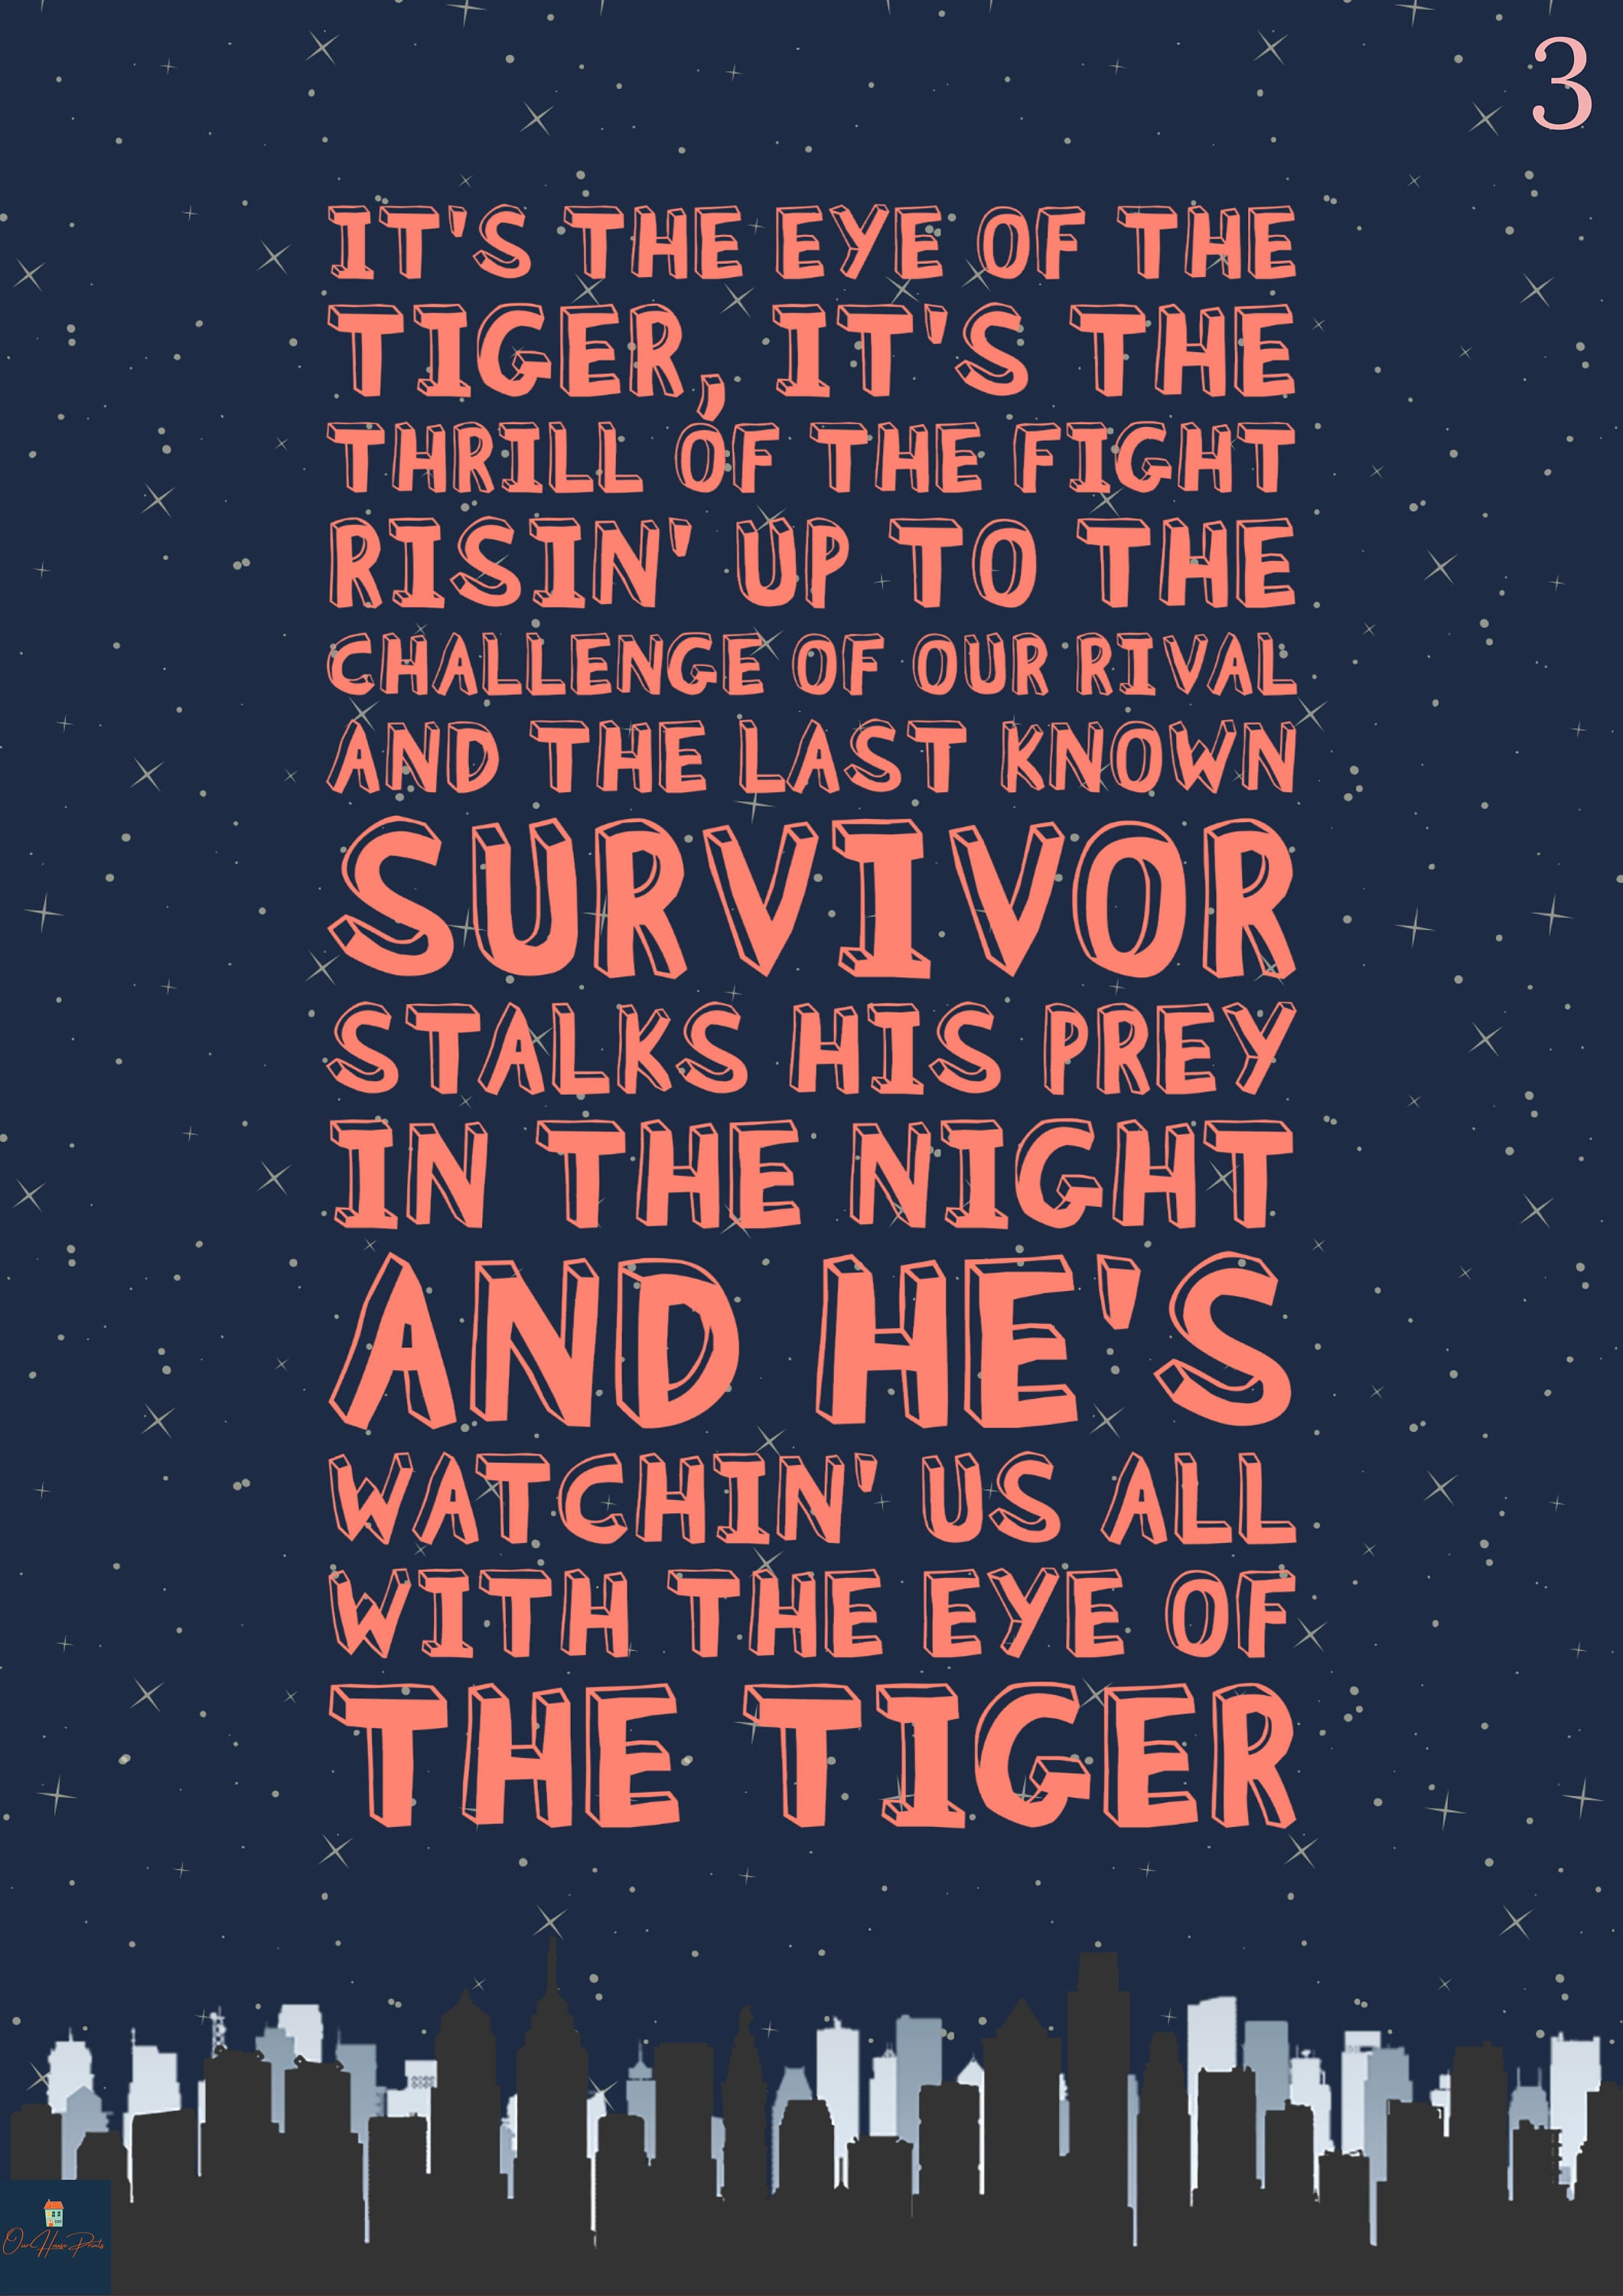 Eye of the Tiger - song and lyrics by Survivor